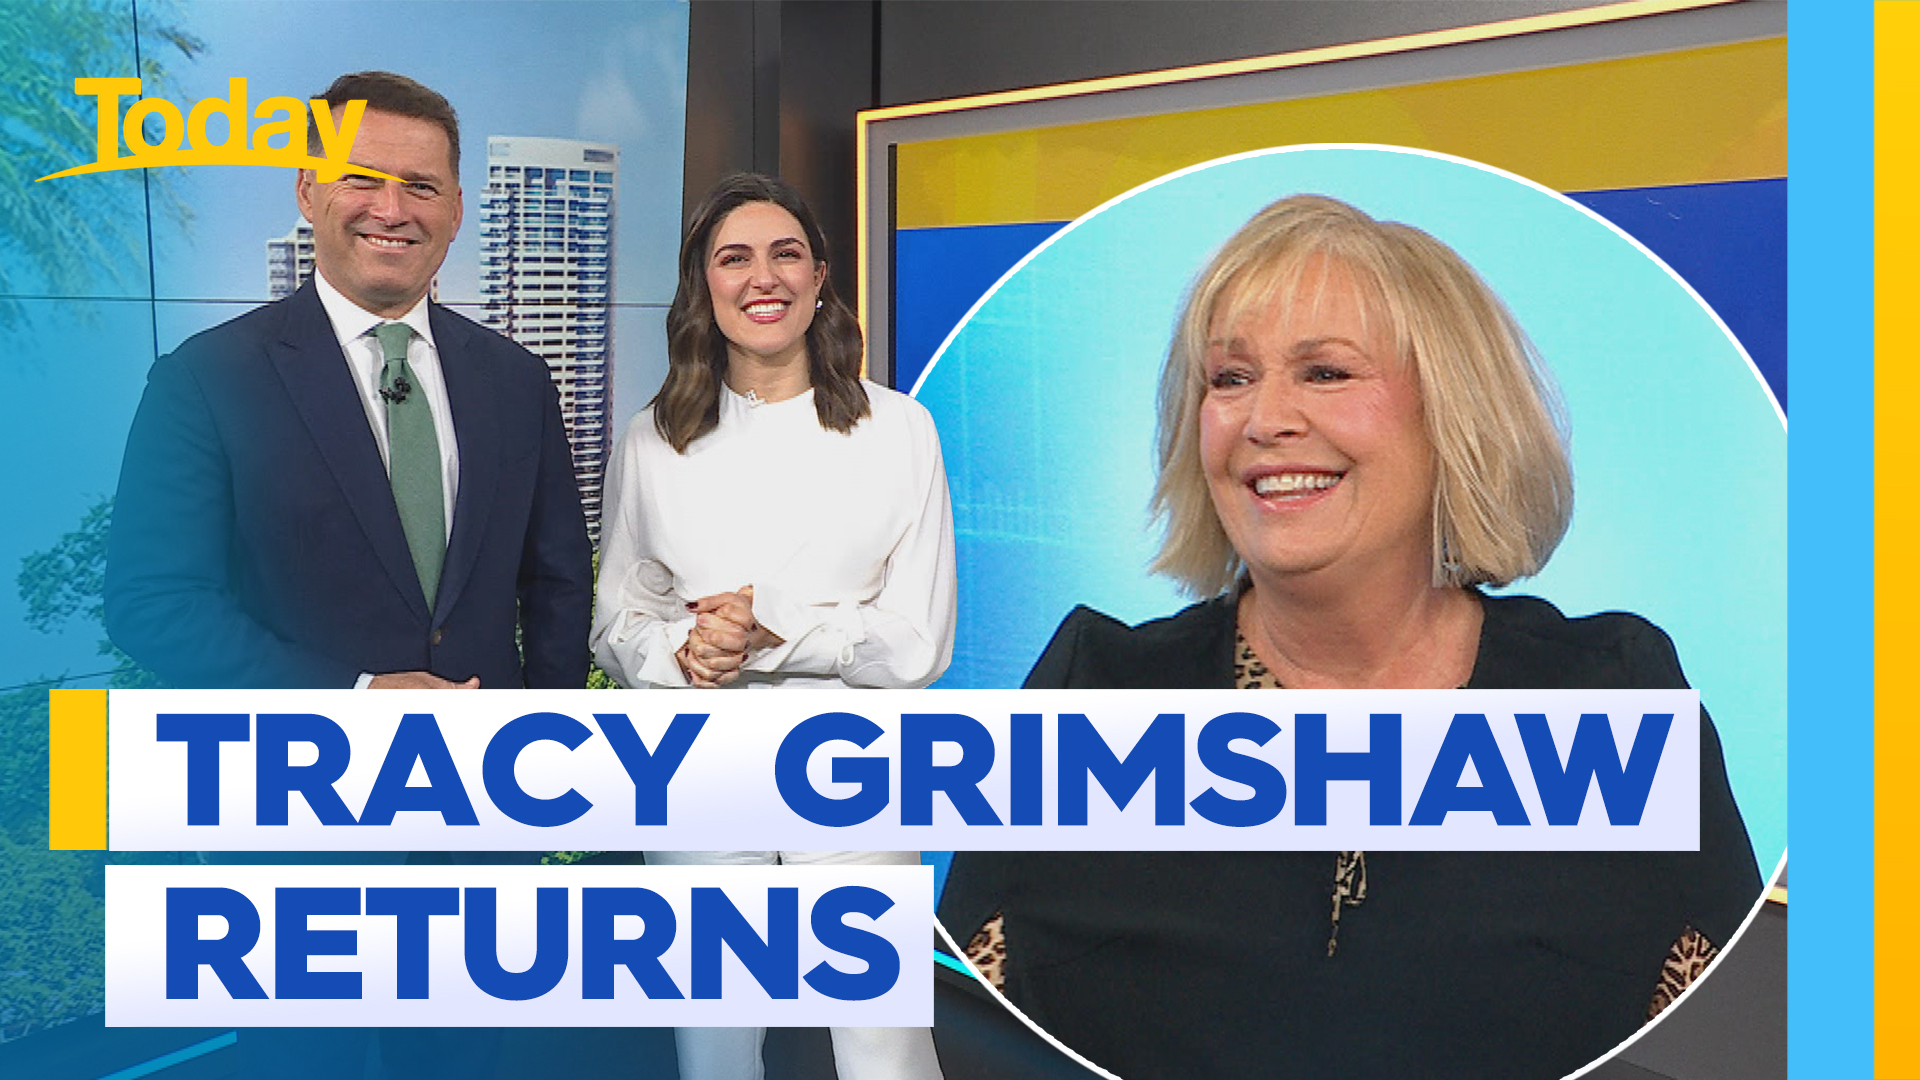 Tracy Grimshaw makes her return to the Today Show